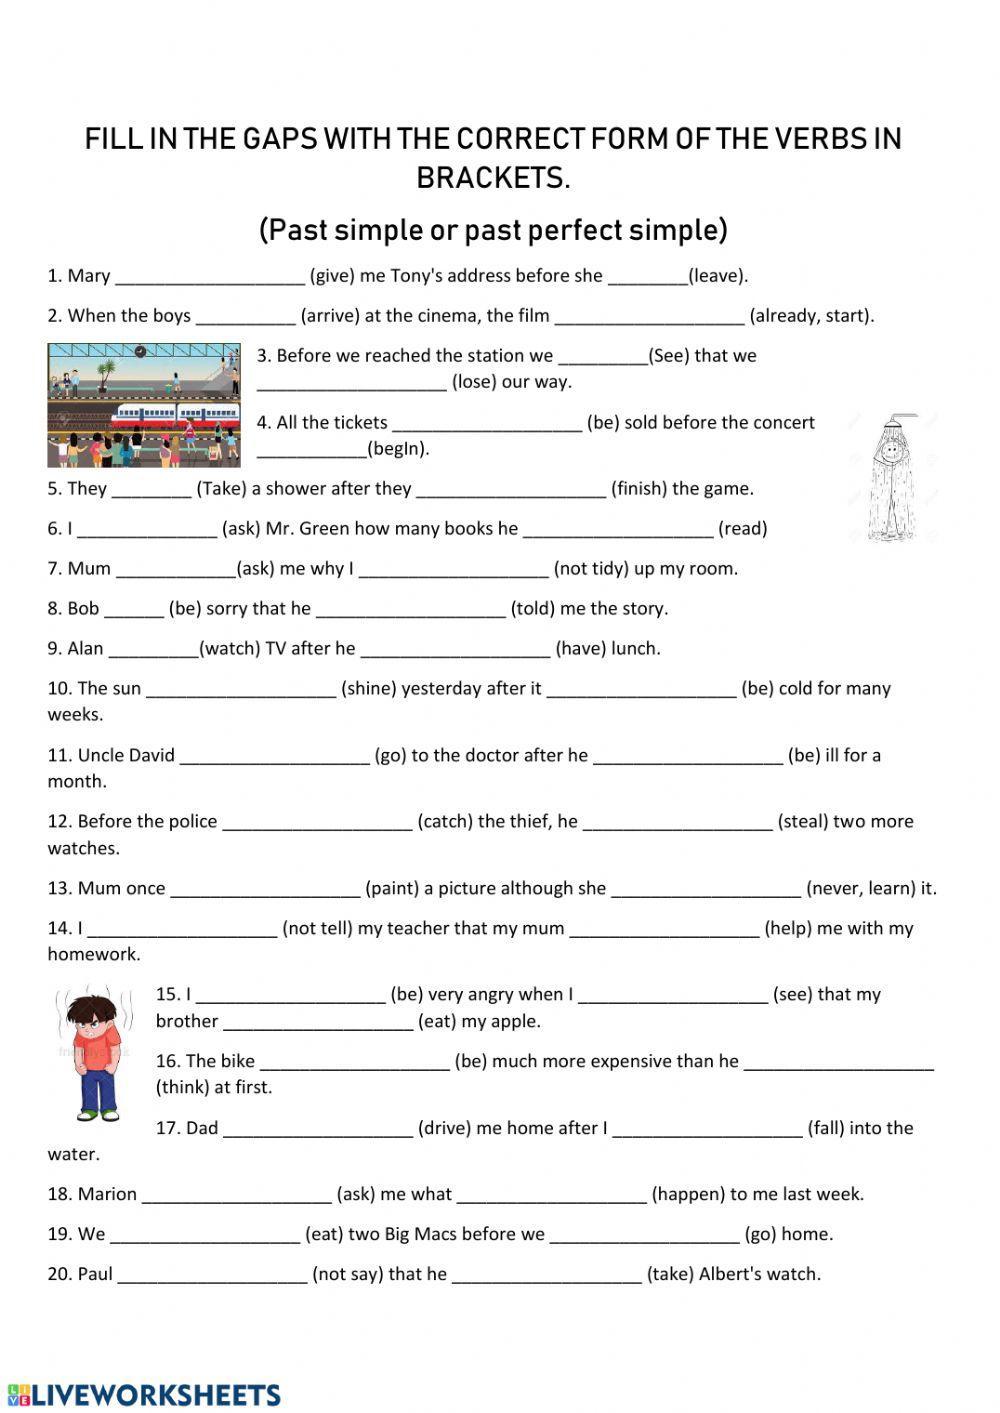 Past simple vs past perfect simple